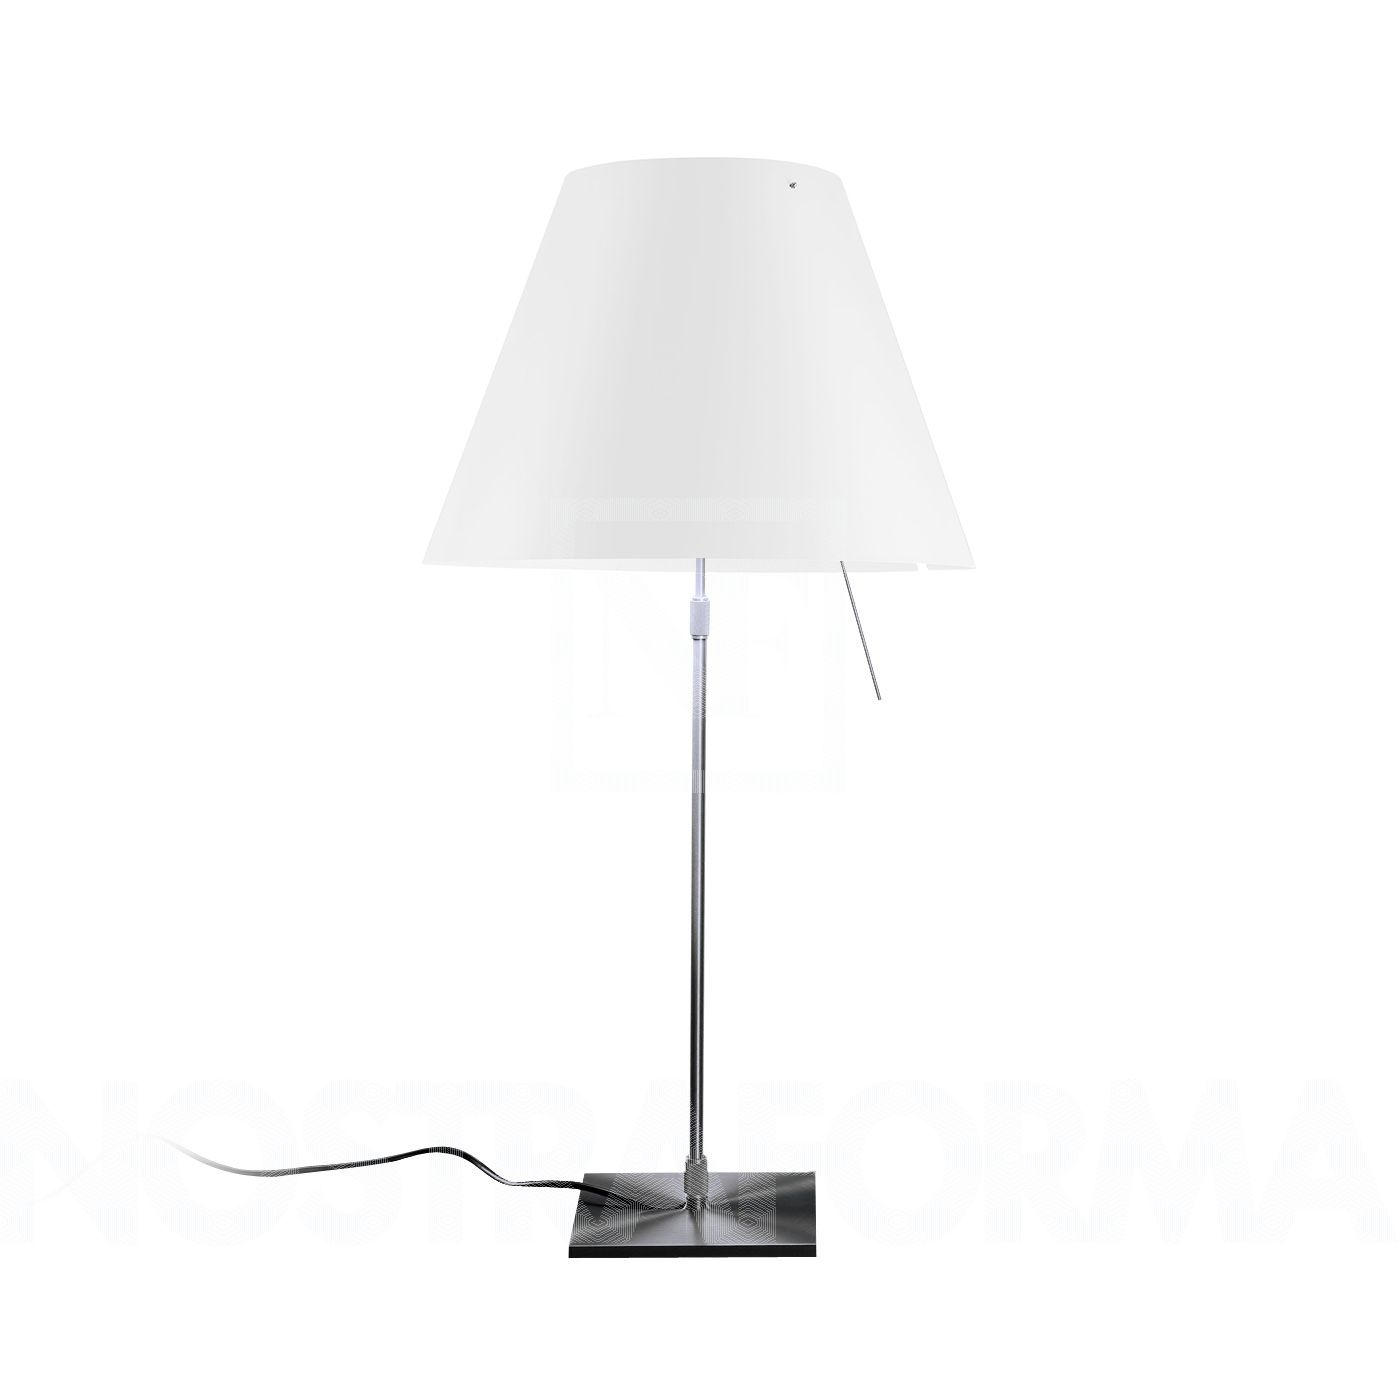 Luceplan Costanza Hue Table Lamp At Nostraforma We Love Design within dimensions 1400 X 1400